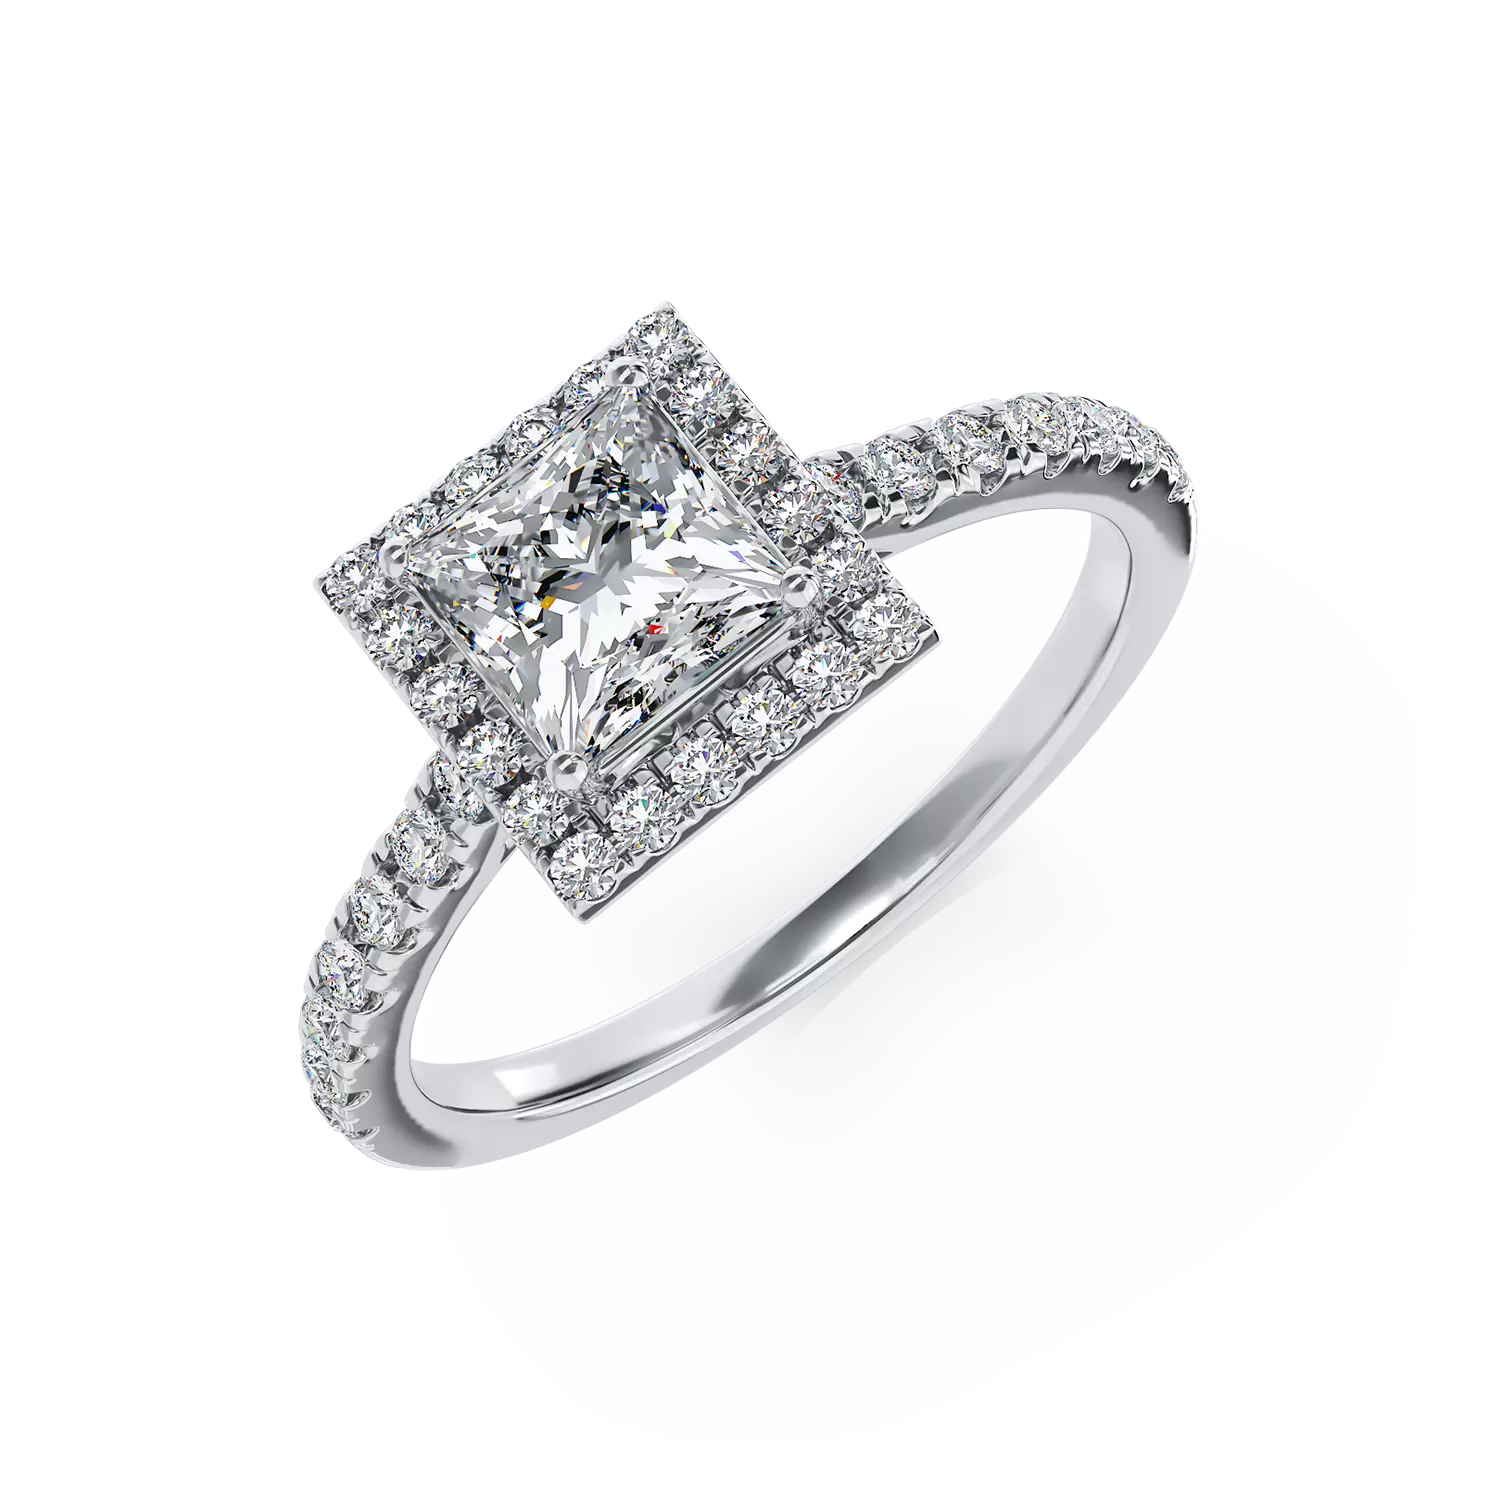 18K white gold engagement ring with 0.8ct diamond and 0.38ct diamonds